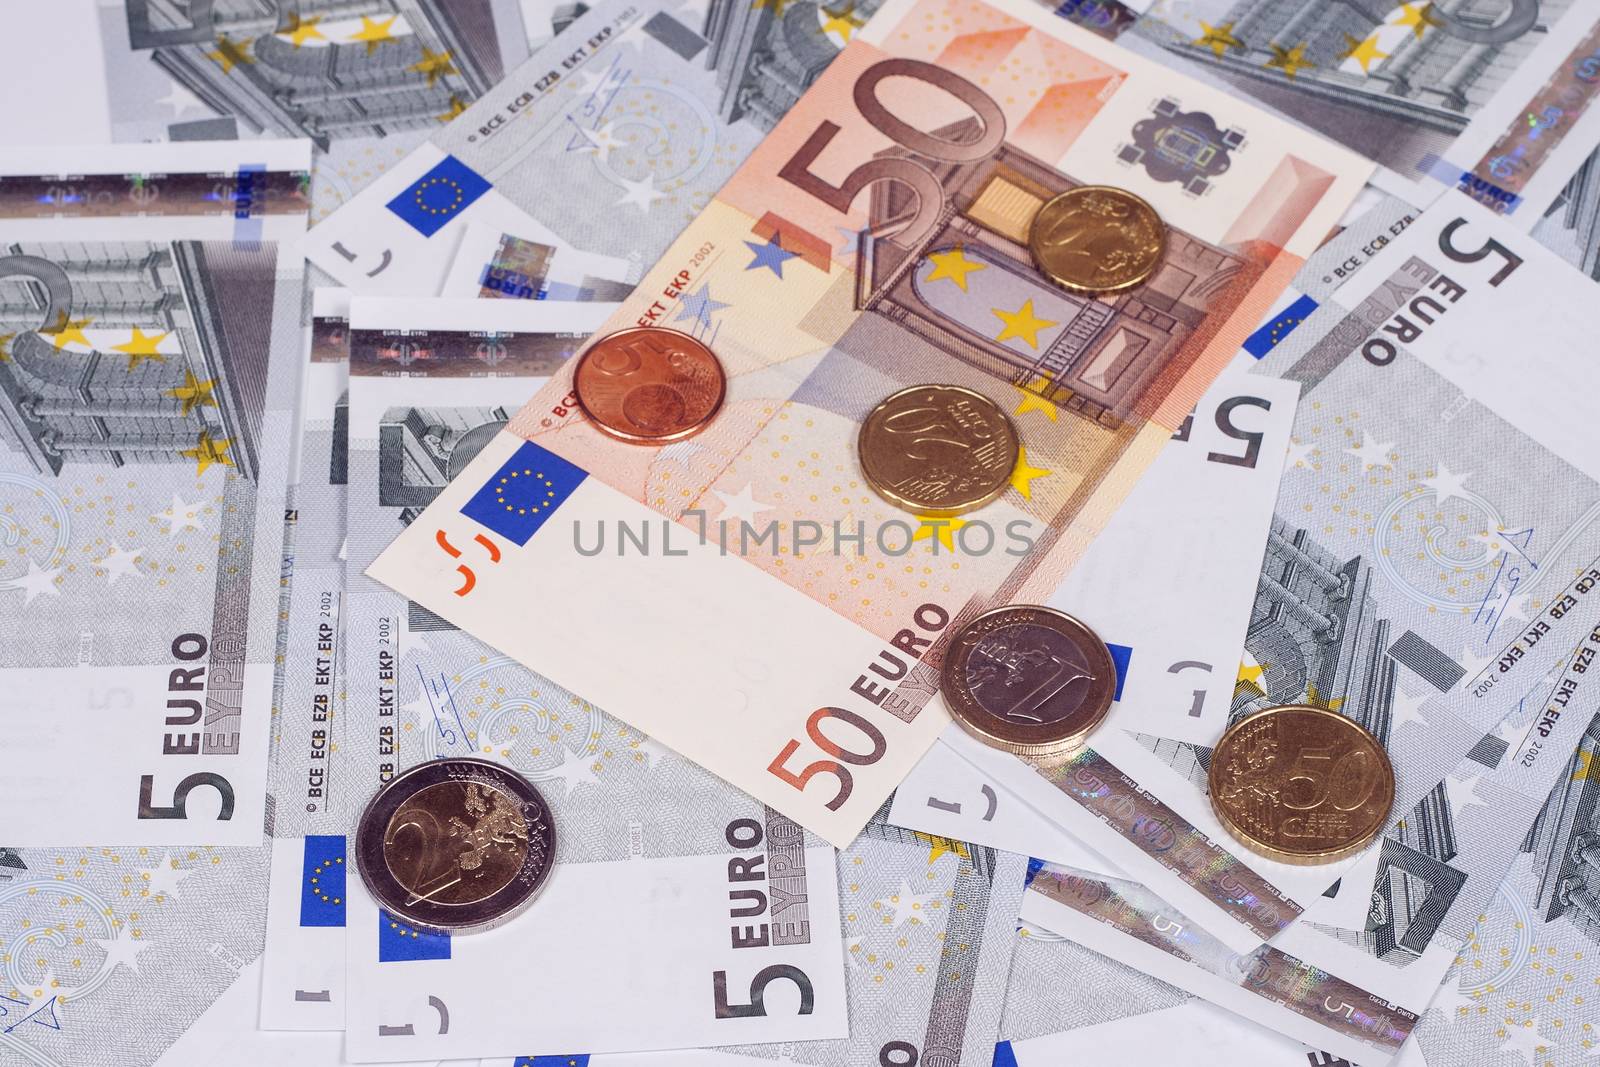 The European currency: banknotes of five and fifty euros and coins